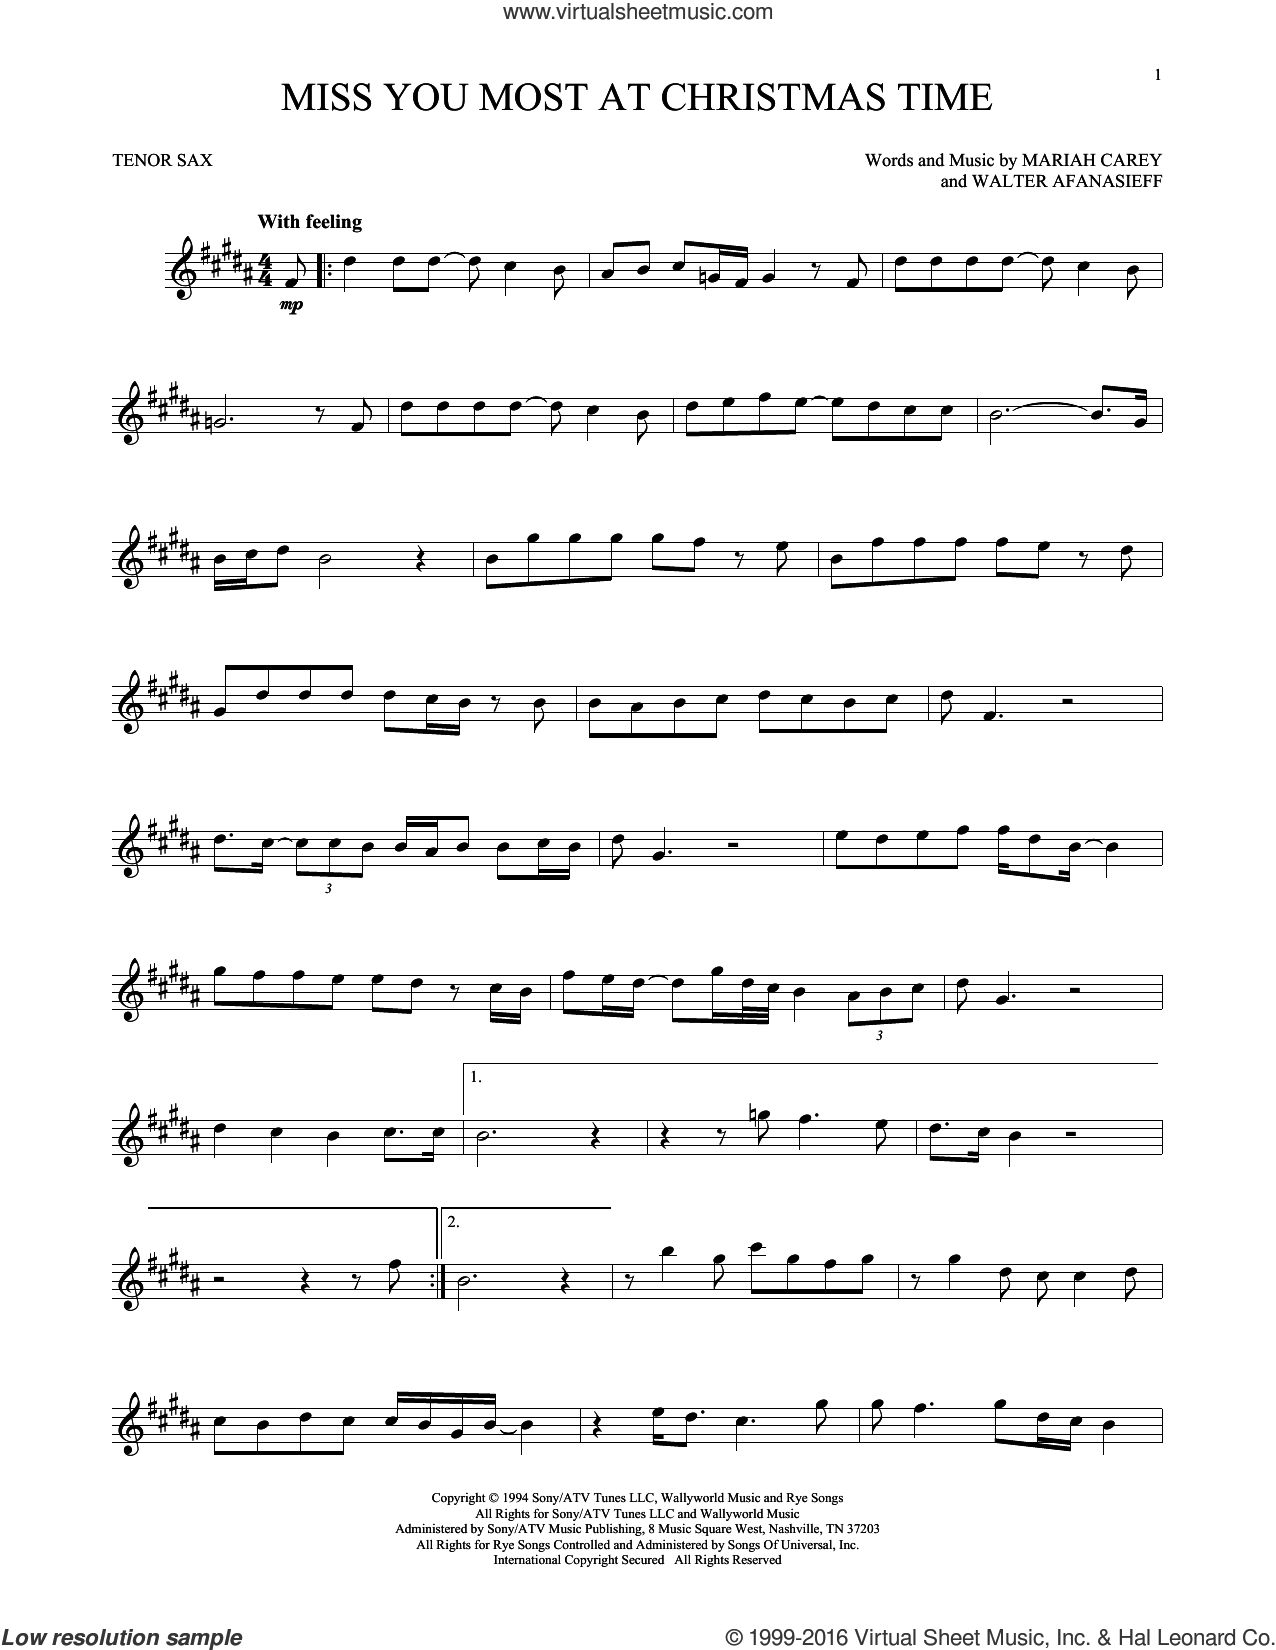 Carey - Miss You Most At Christmas Time sheet music for tenor saxophone solo